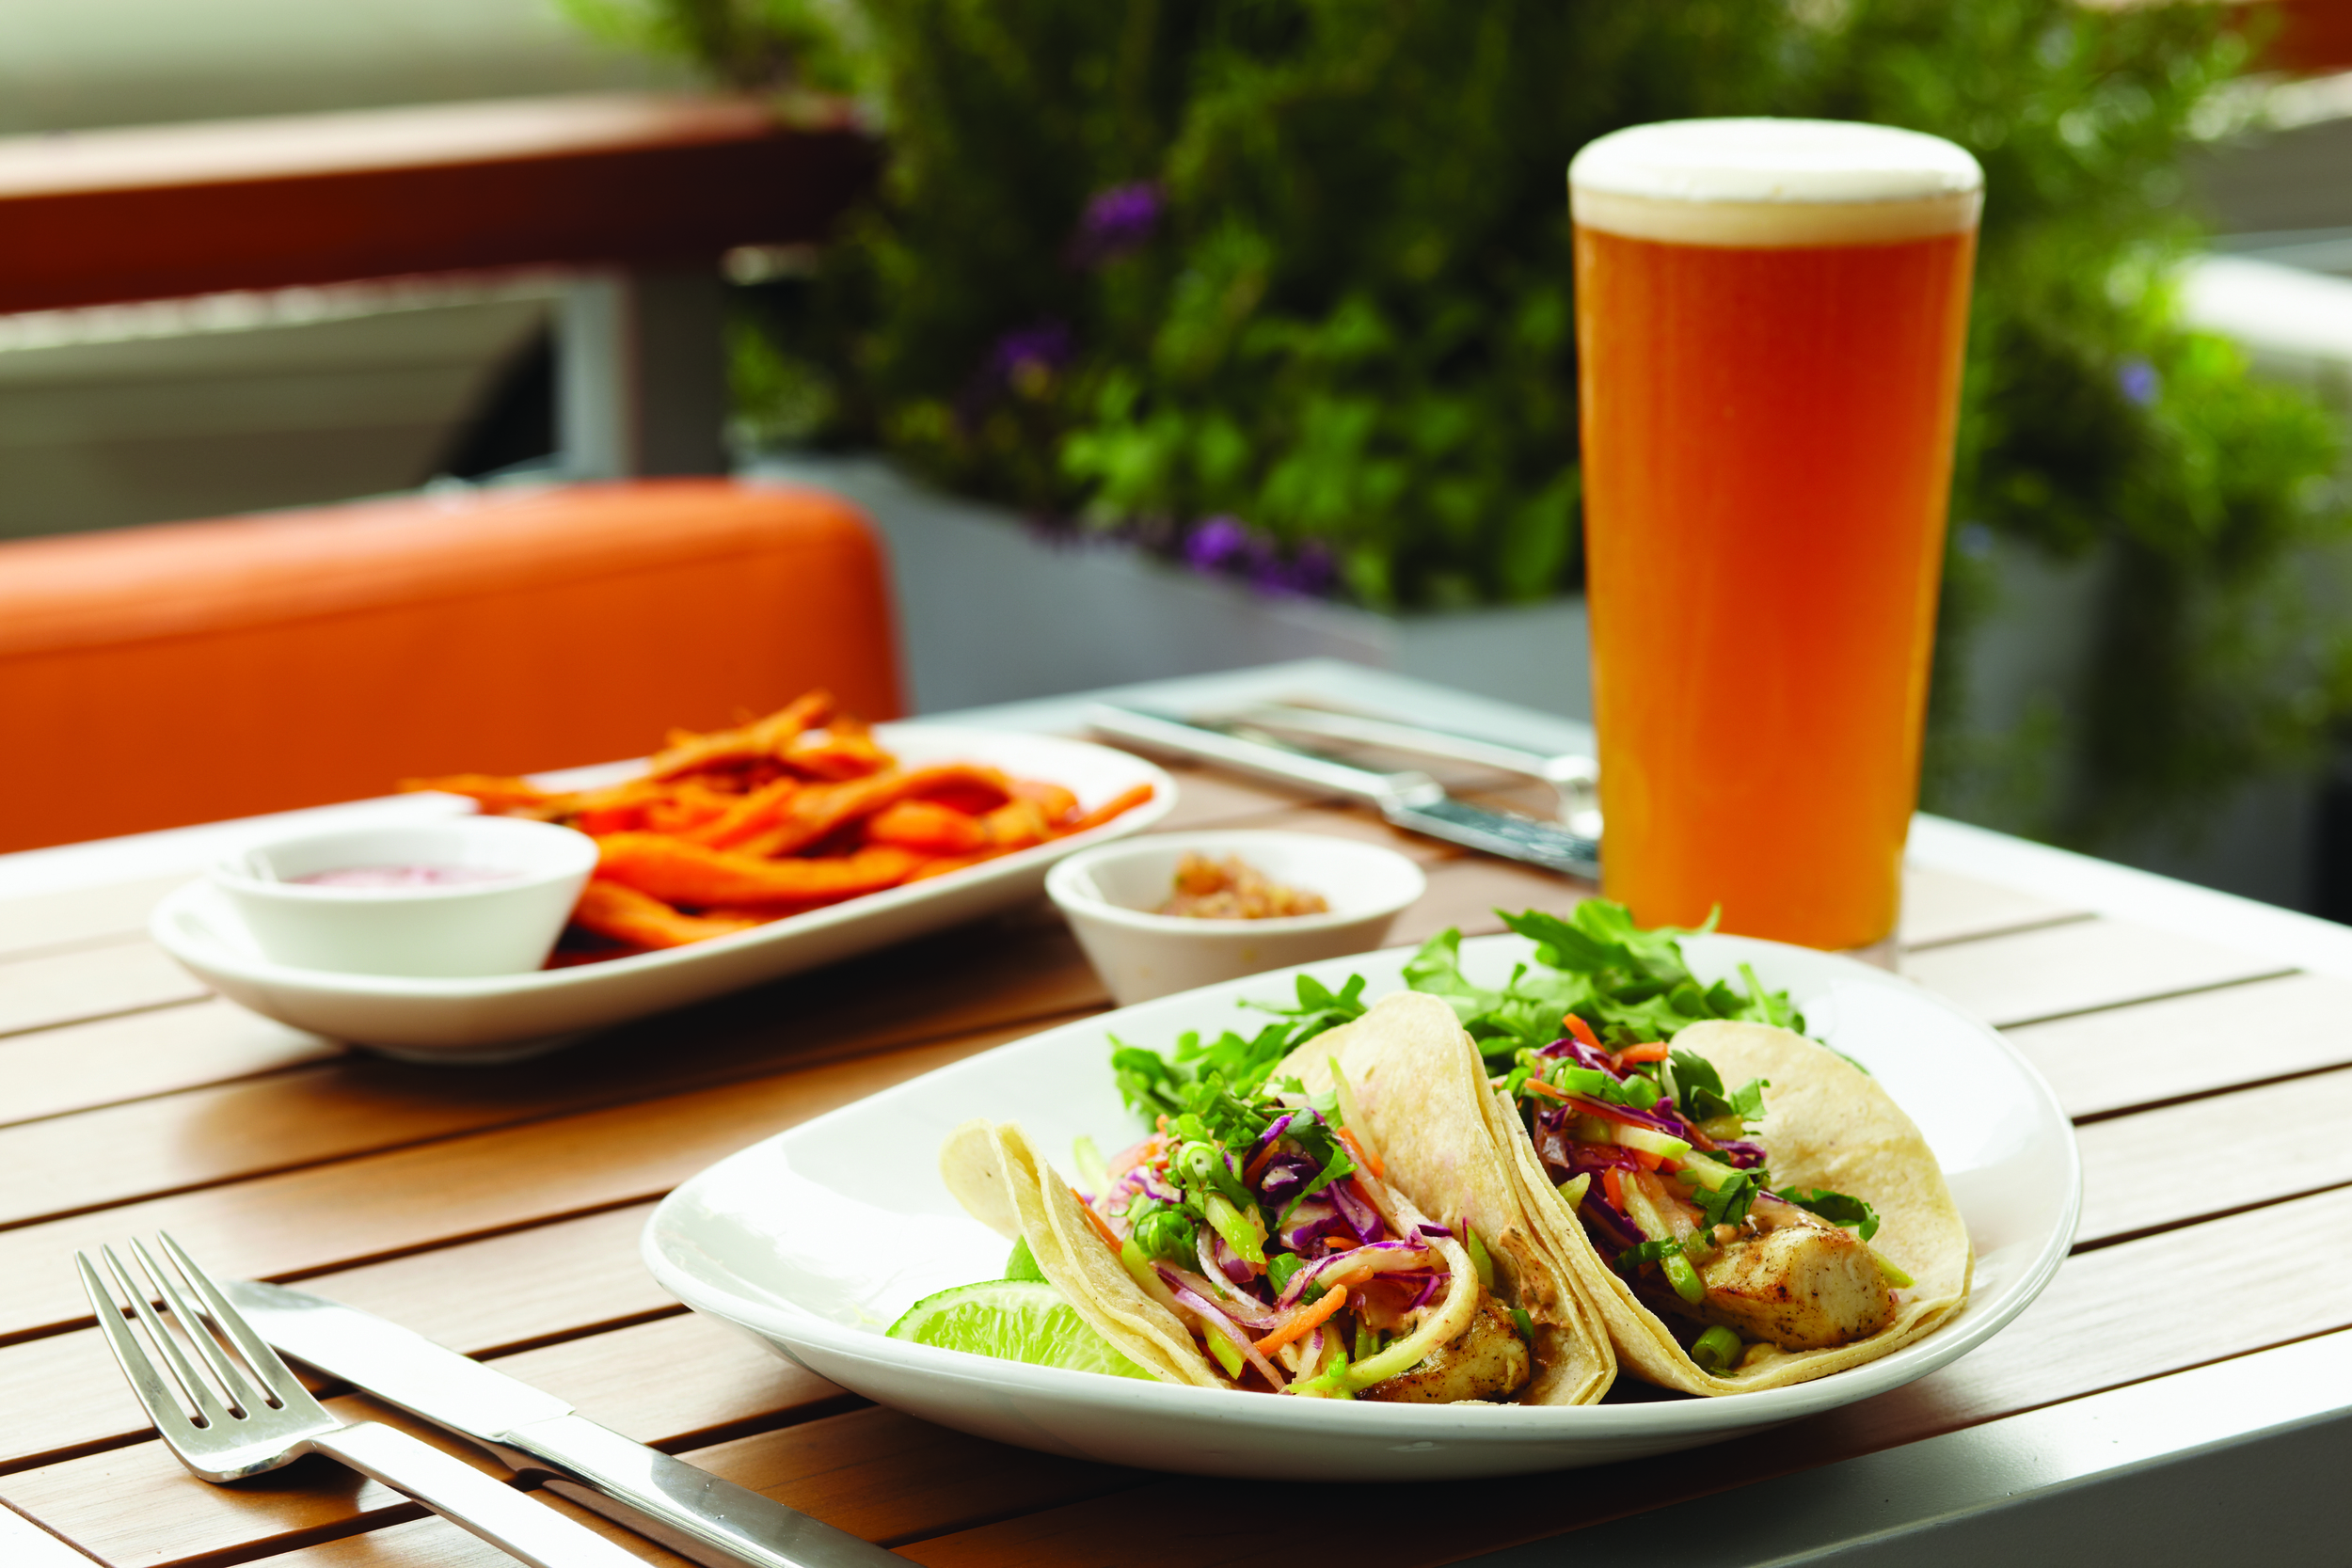 LYFE Kitchen pairs healthy food with craft beer